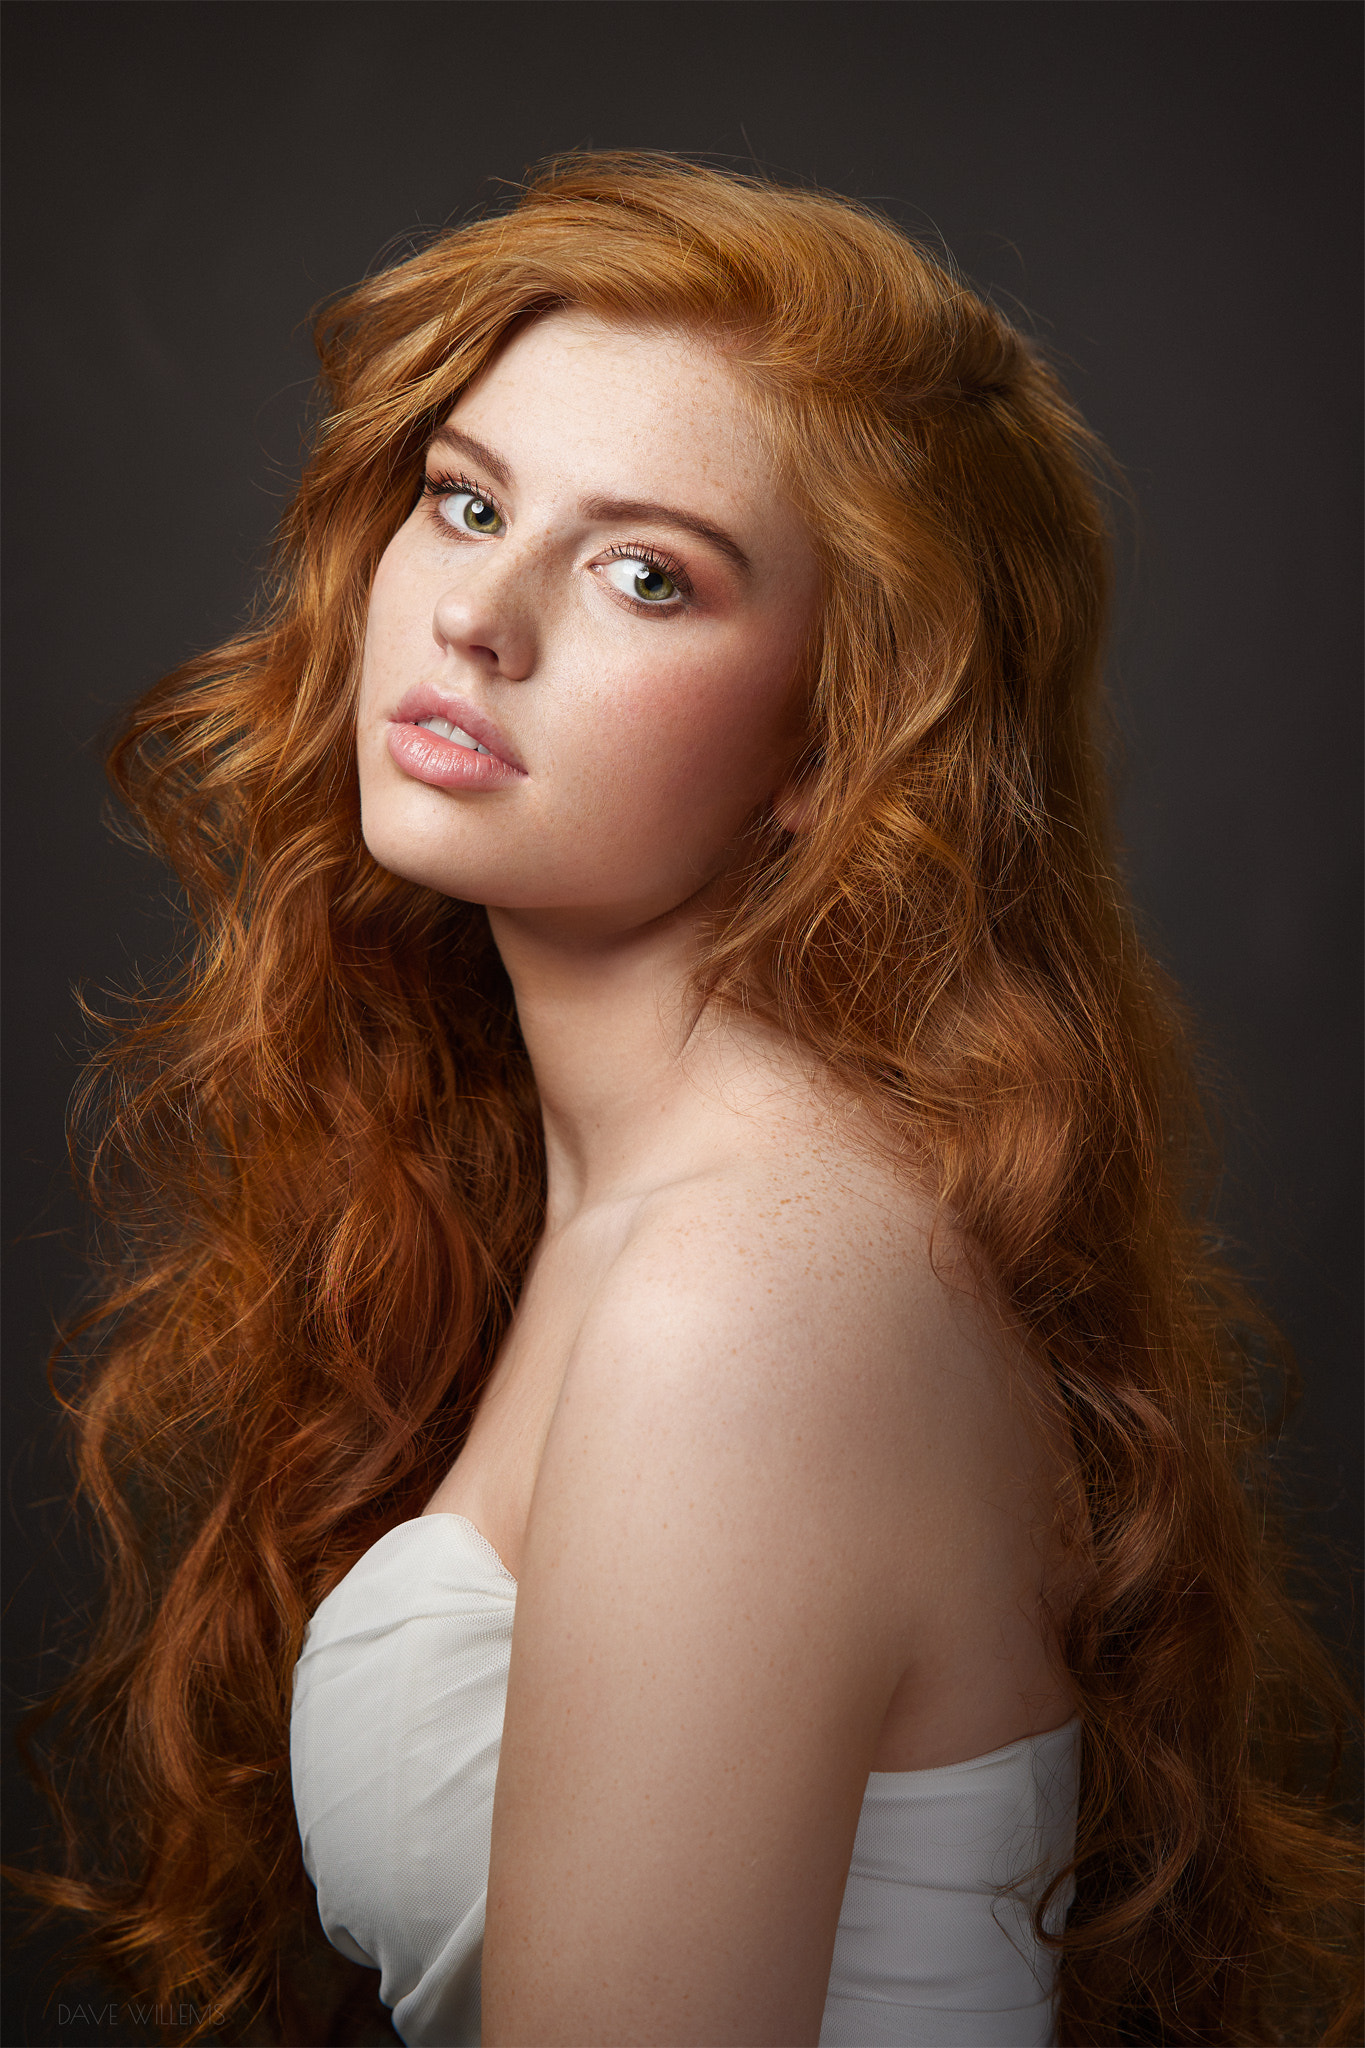 Dave Willems Women Redhead Long Hair Wavy Hair Dress White Clothing Freckles Bare Shoulders Portrait 1365x2048